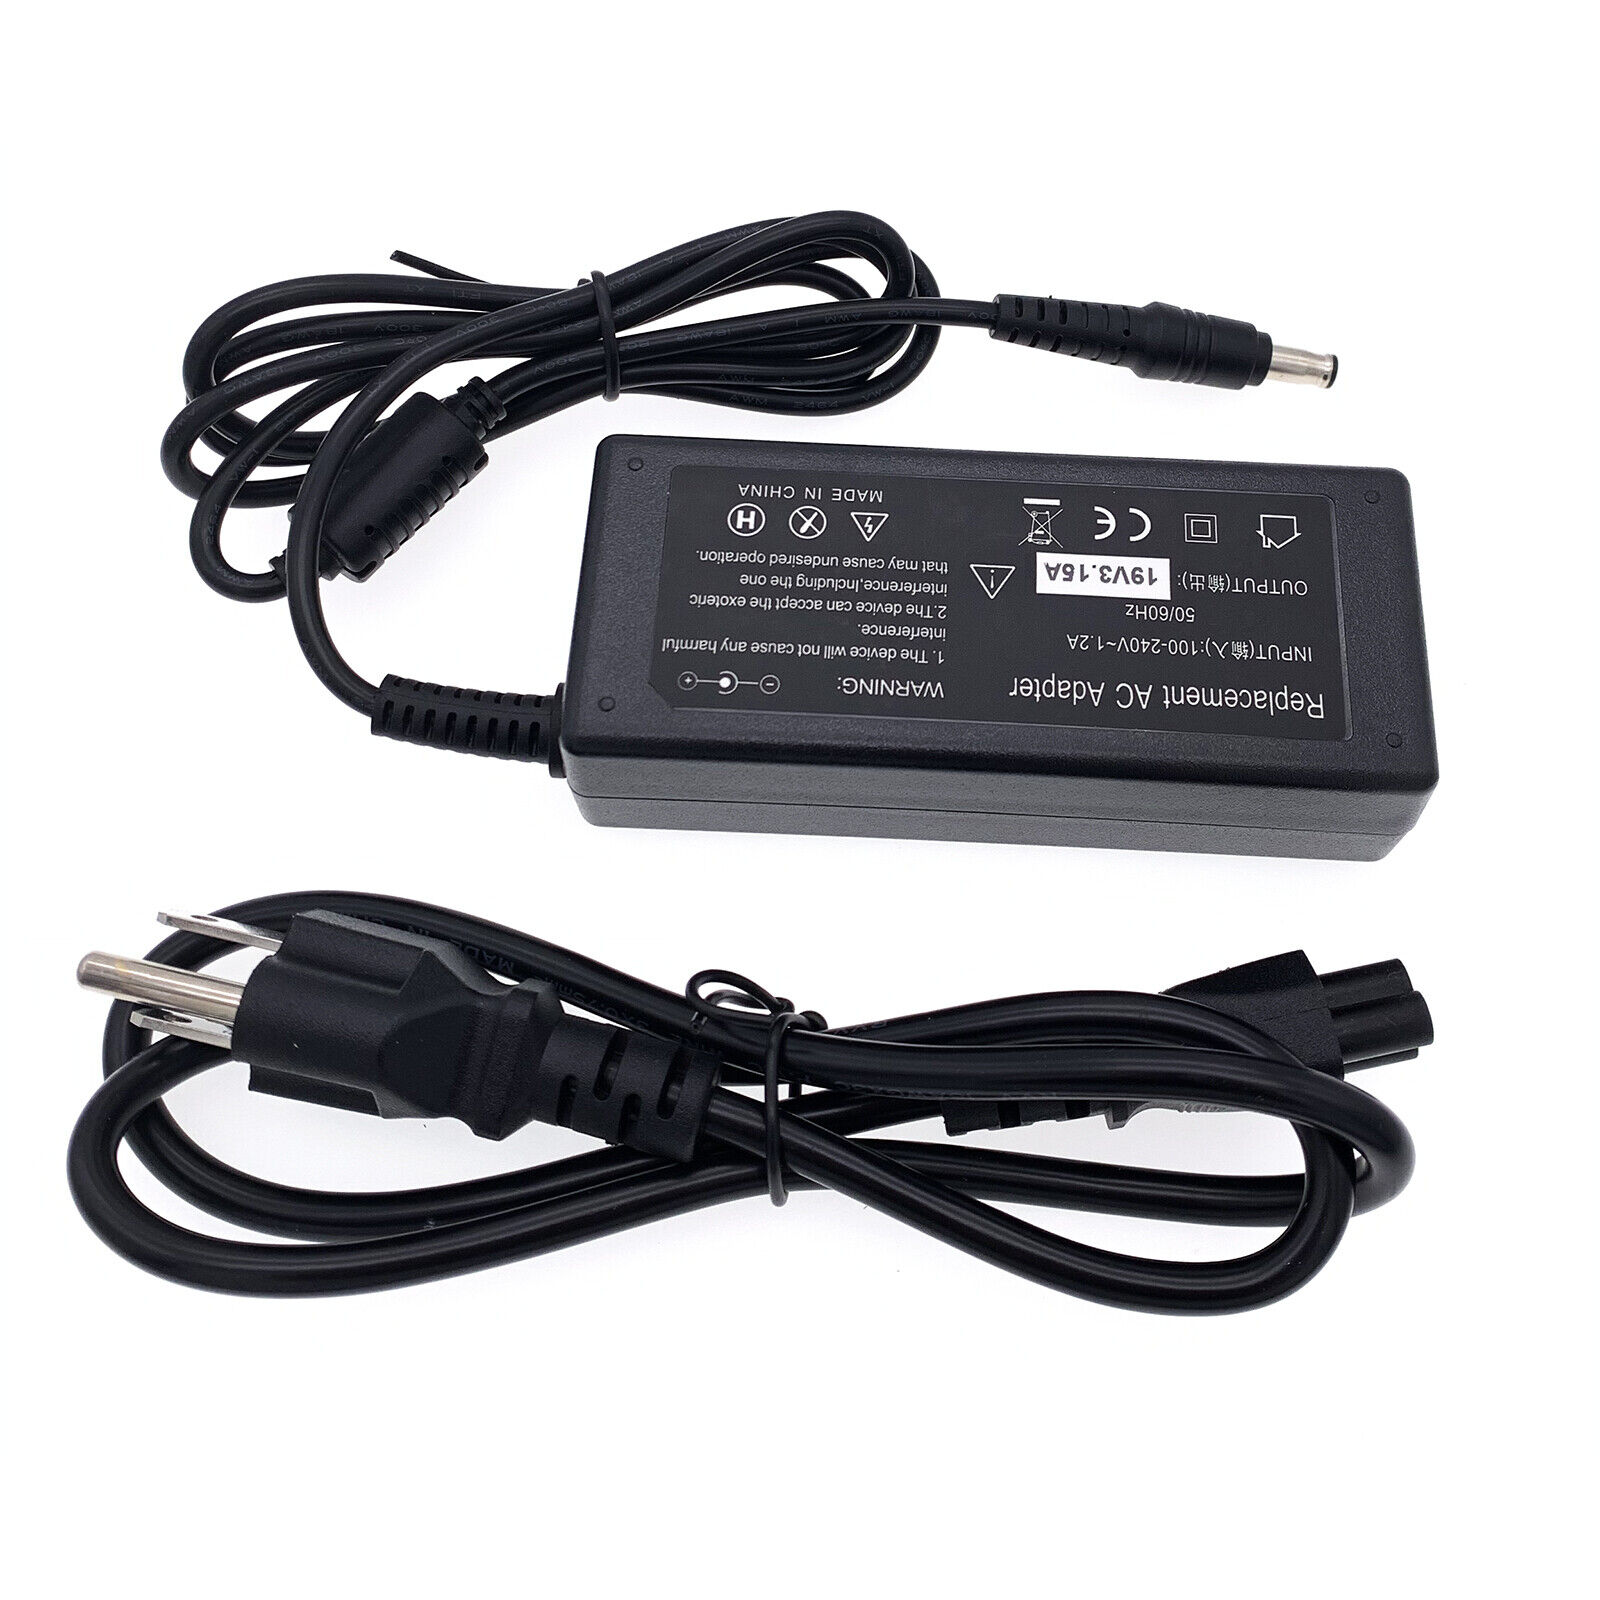 60W AC Adapter Battery Power Charger For Samsung NP350V5C-A03US NP355E5C-A01US